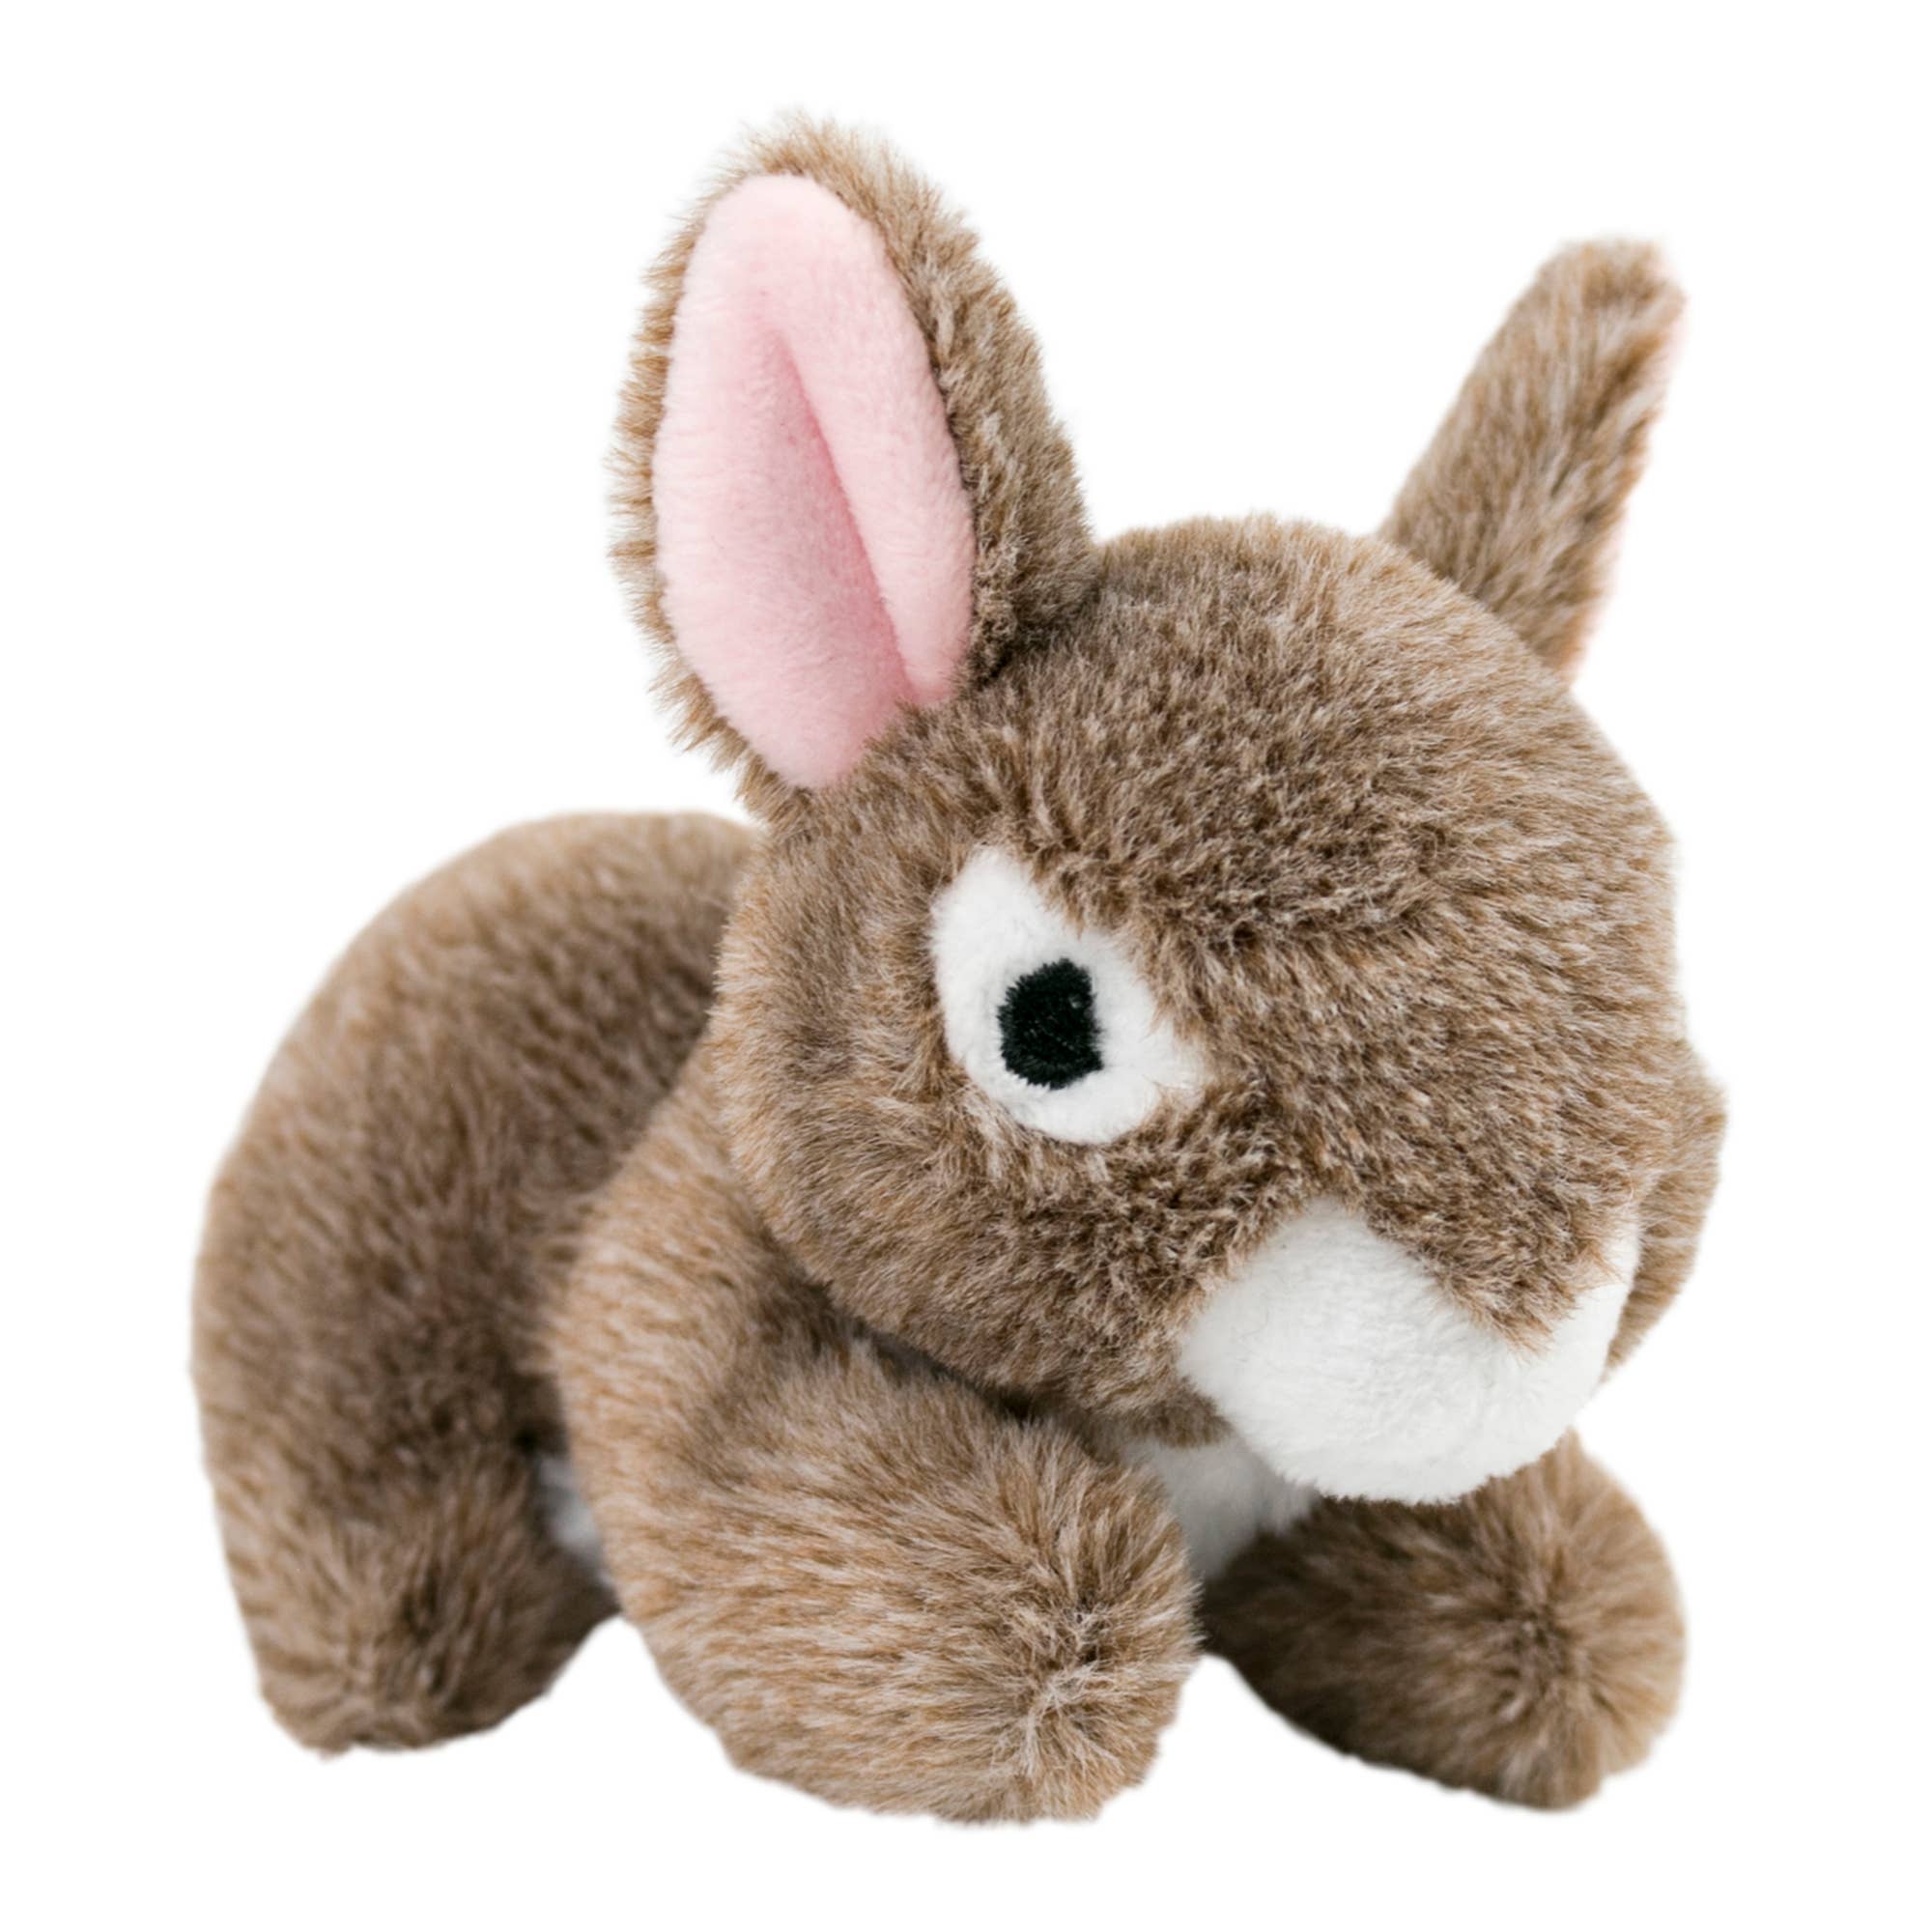 Tall Tails - 5" Plush Bunny Squeaker Toy